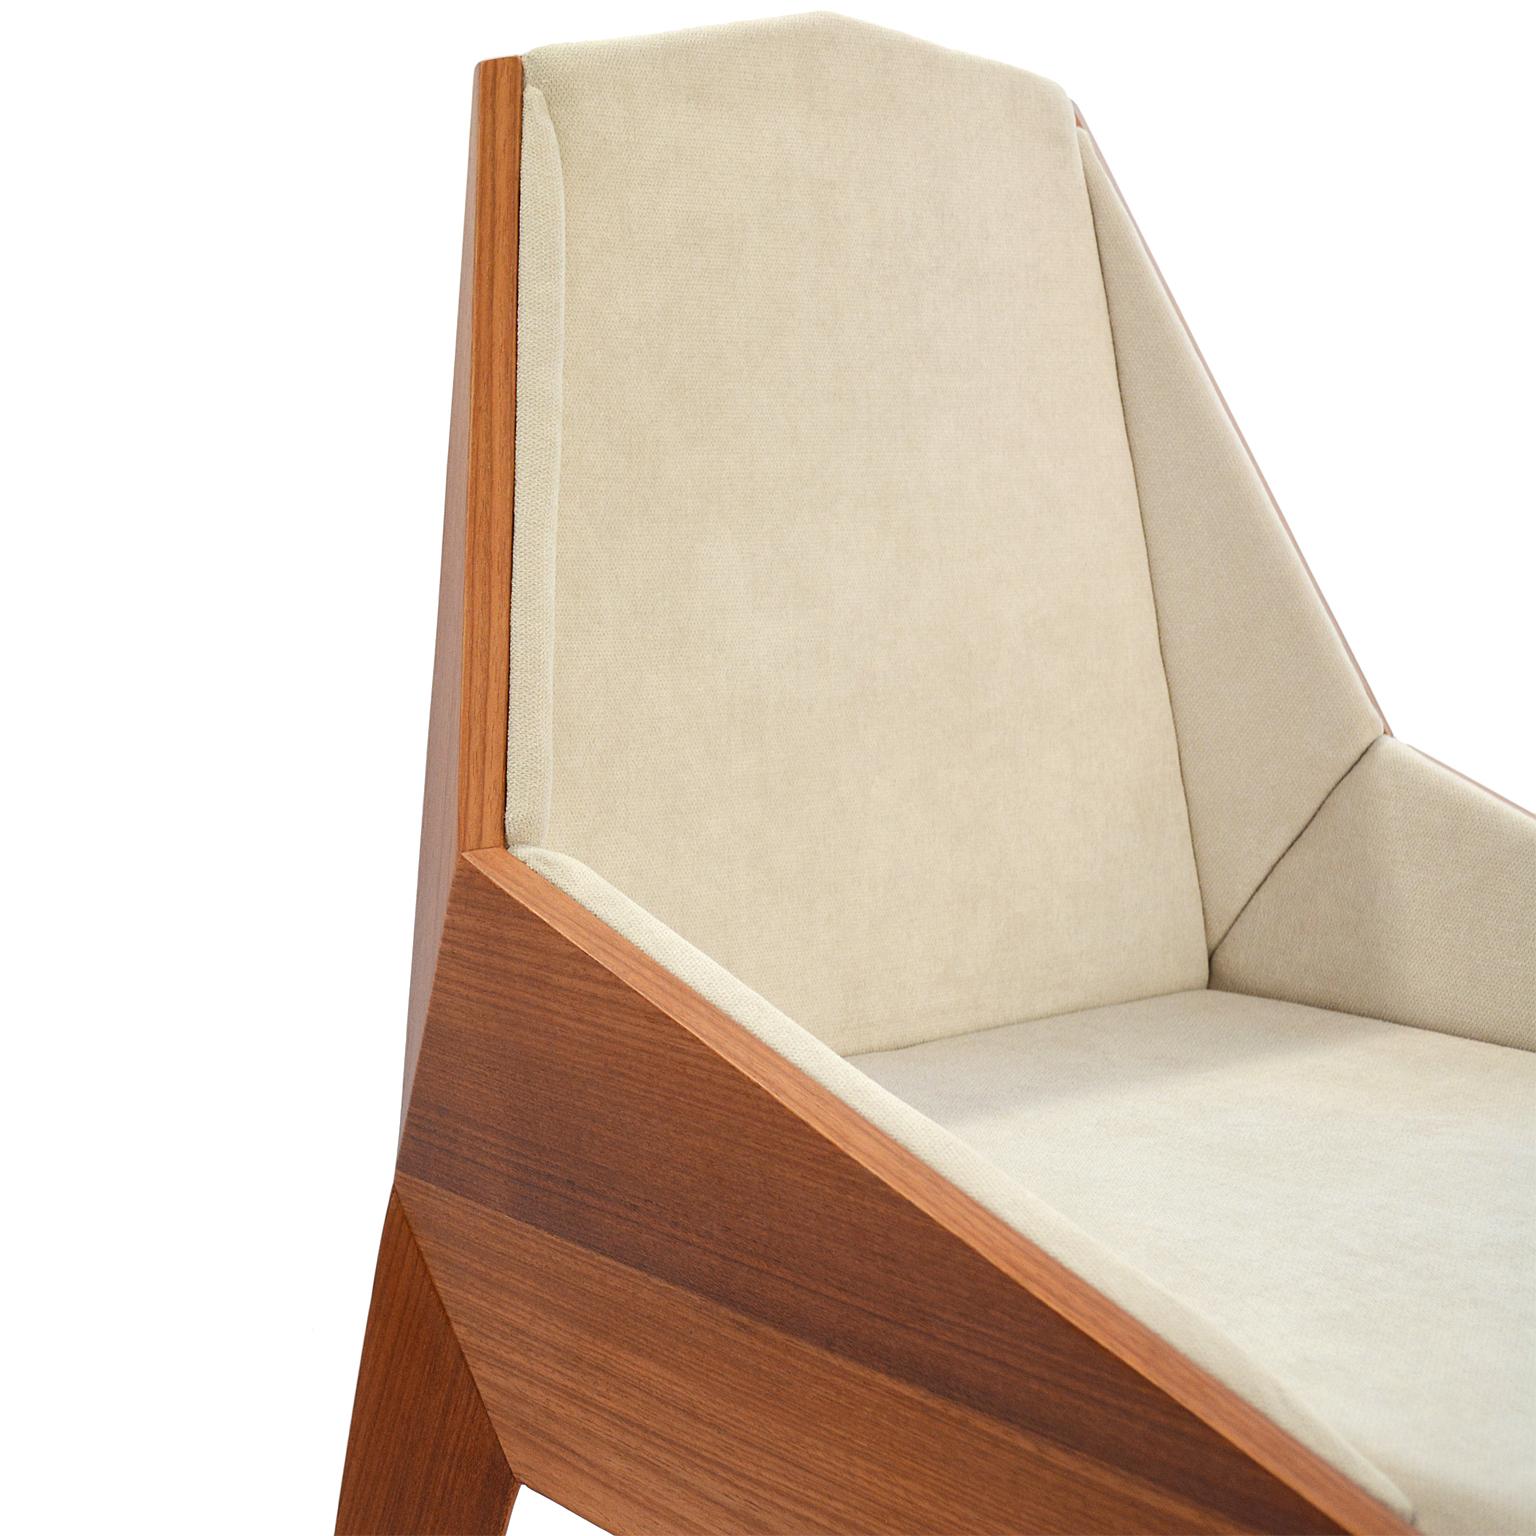 Faceted Wood Chair, Triarm, Contemporary Brazilian Design In New Condition For Sale In Sao Paulo, BR